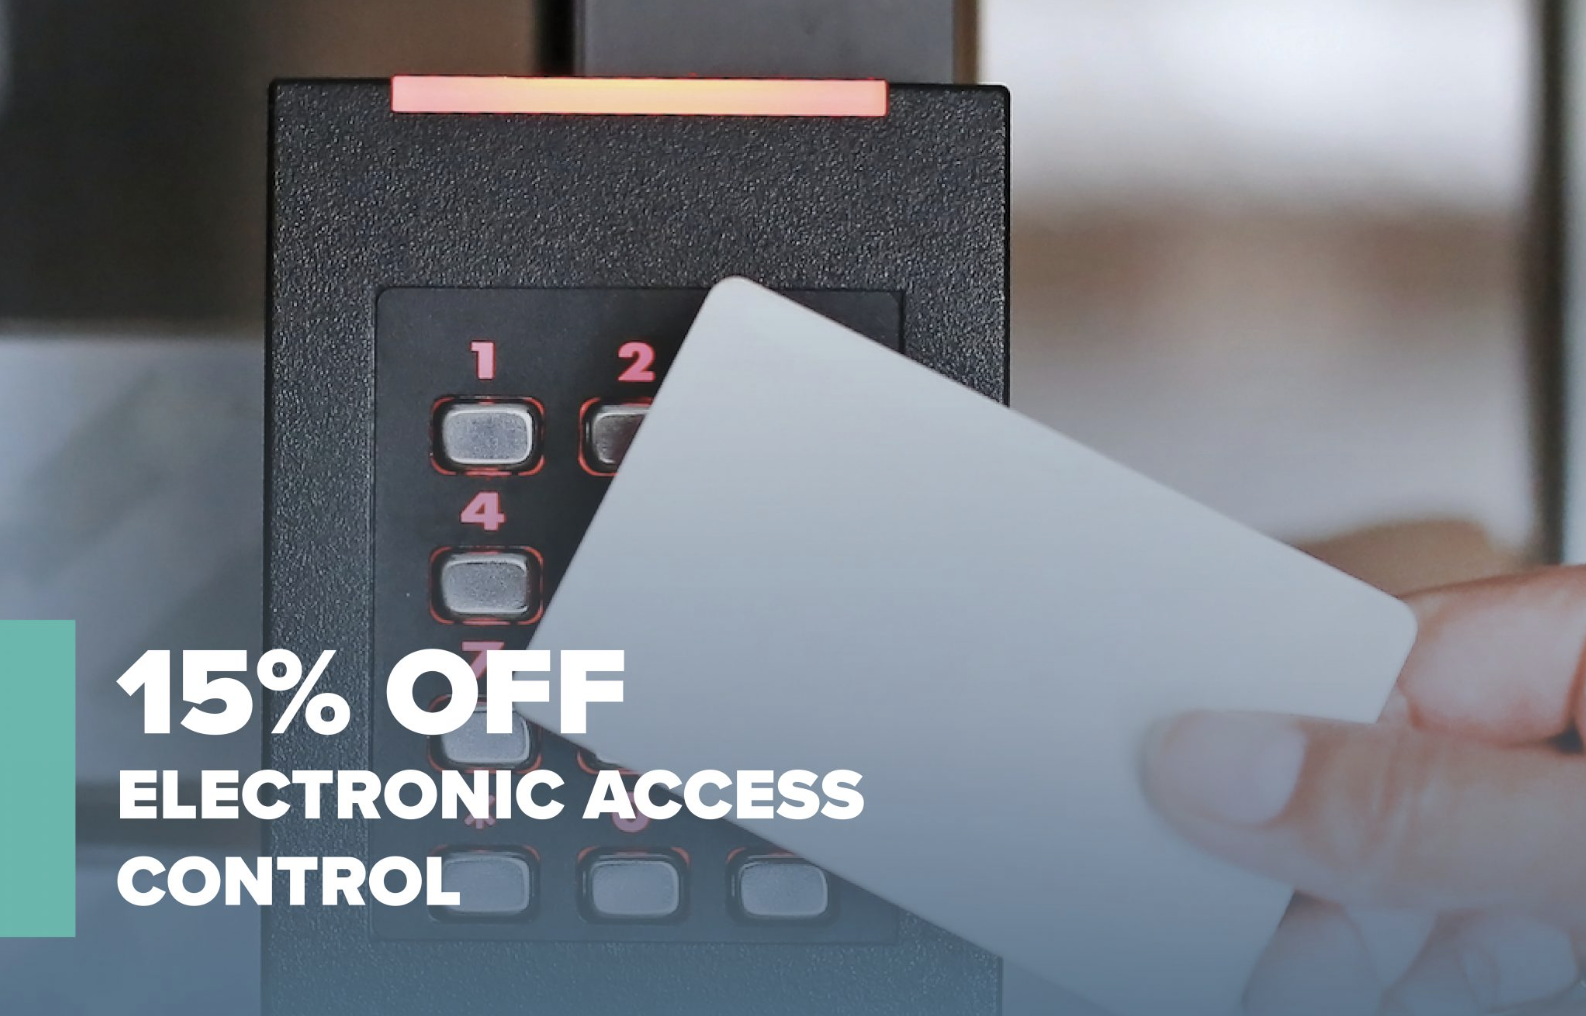 Save 15% on Electronic Access Control Through August